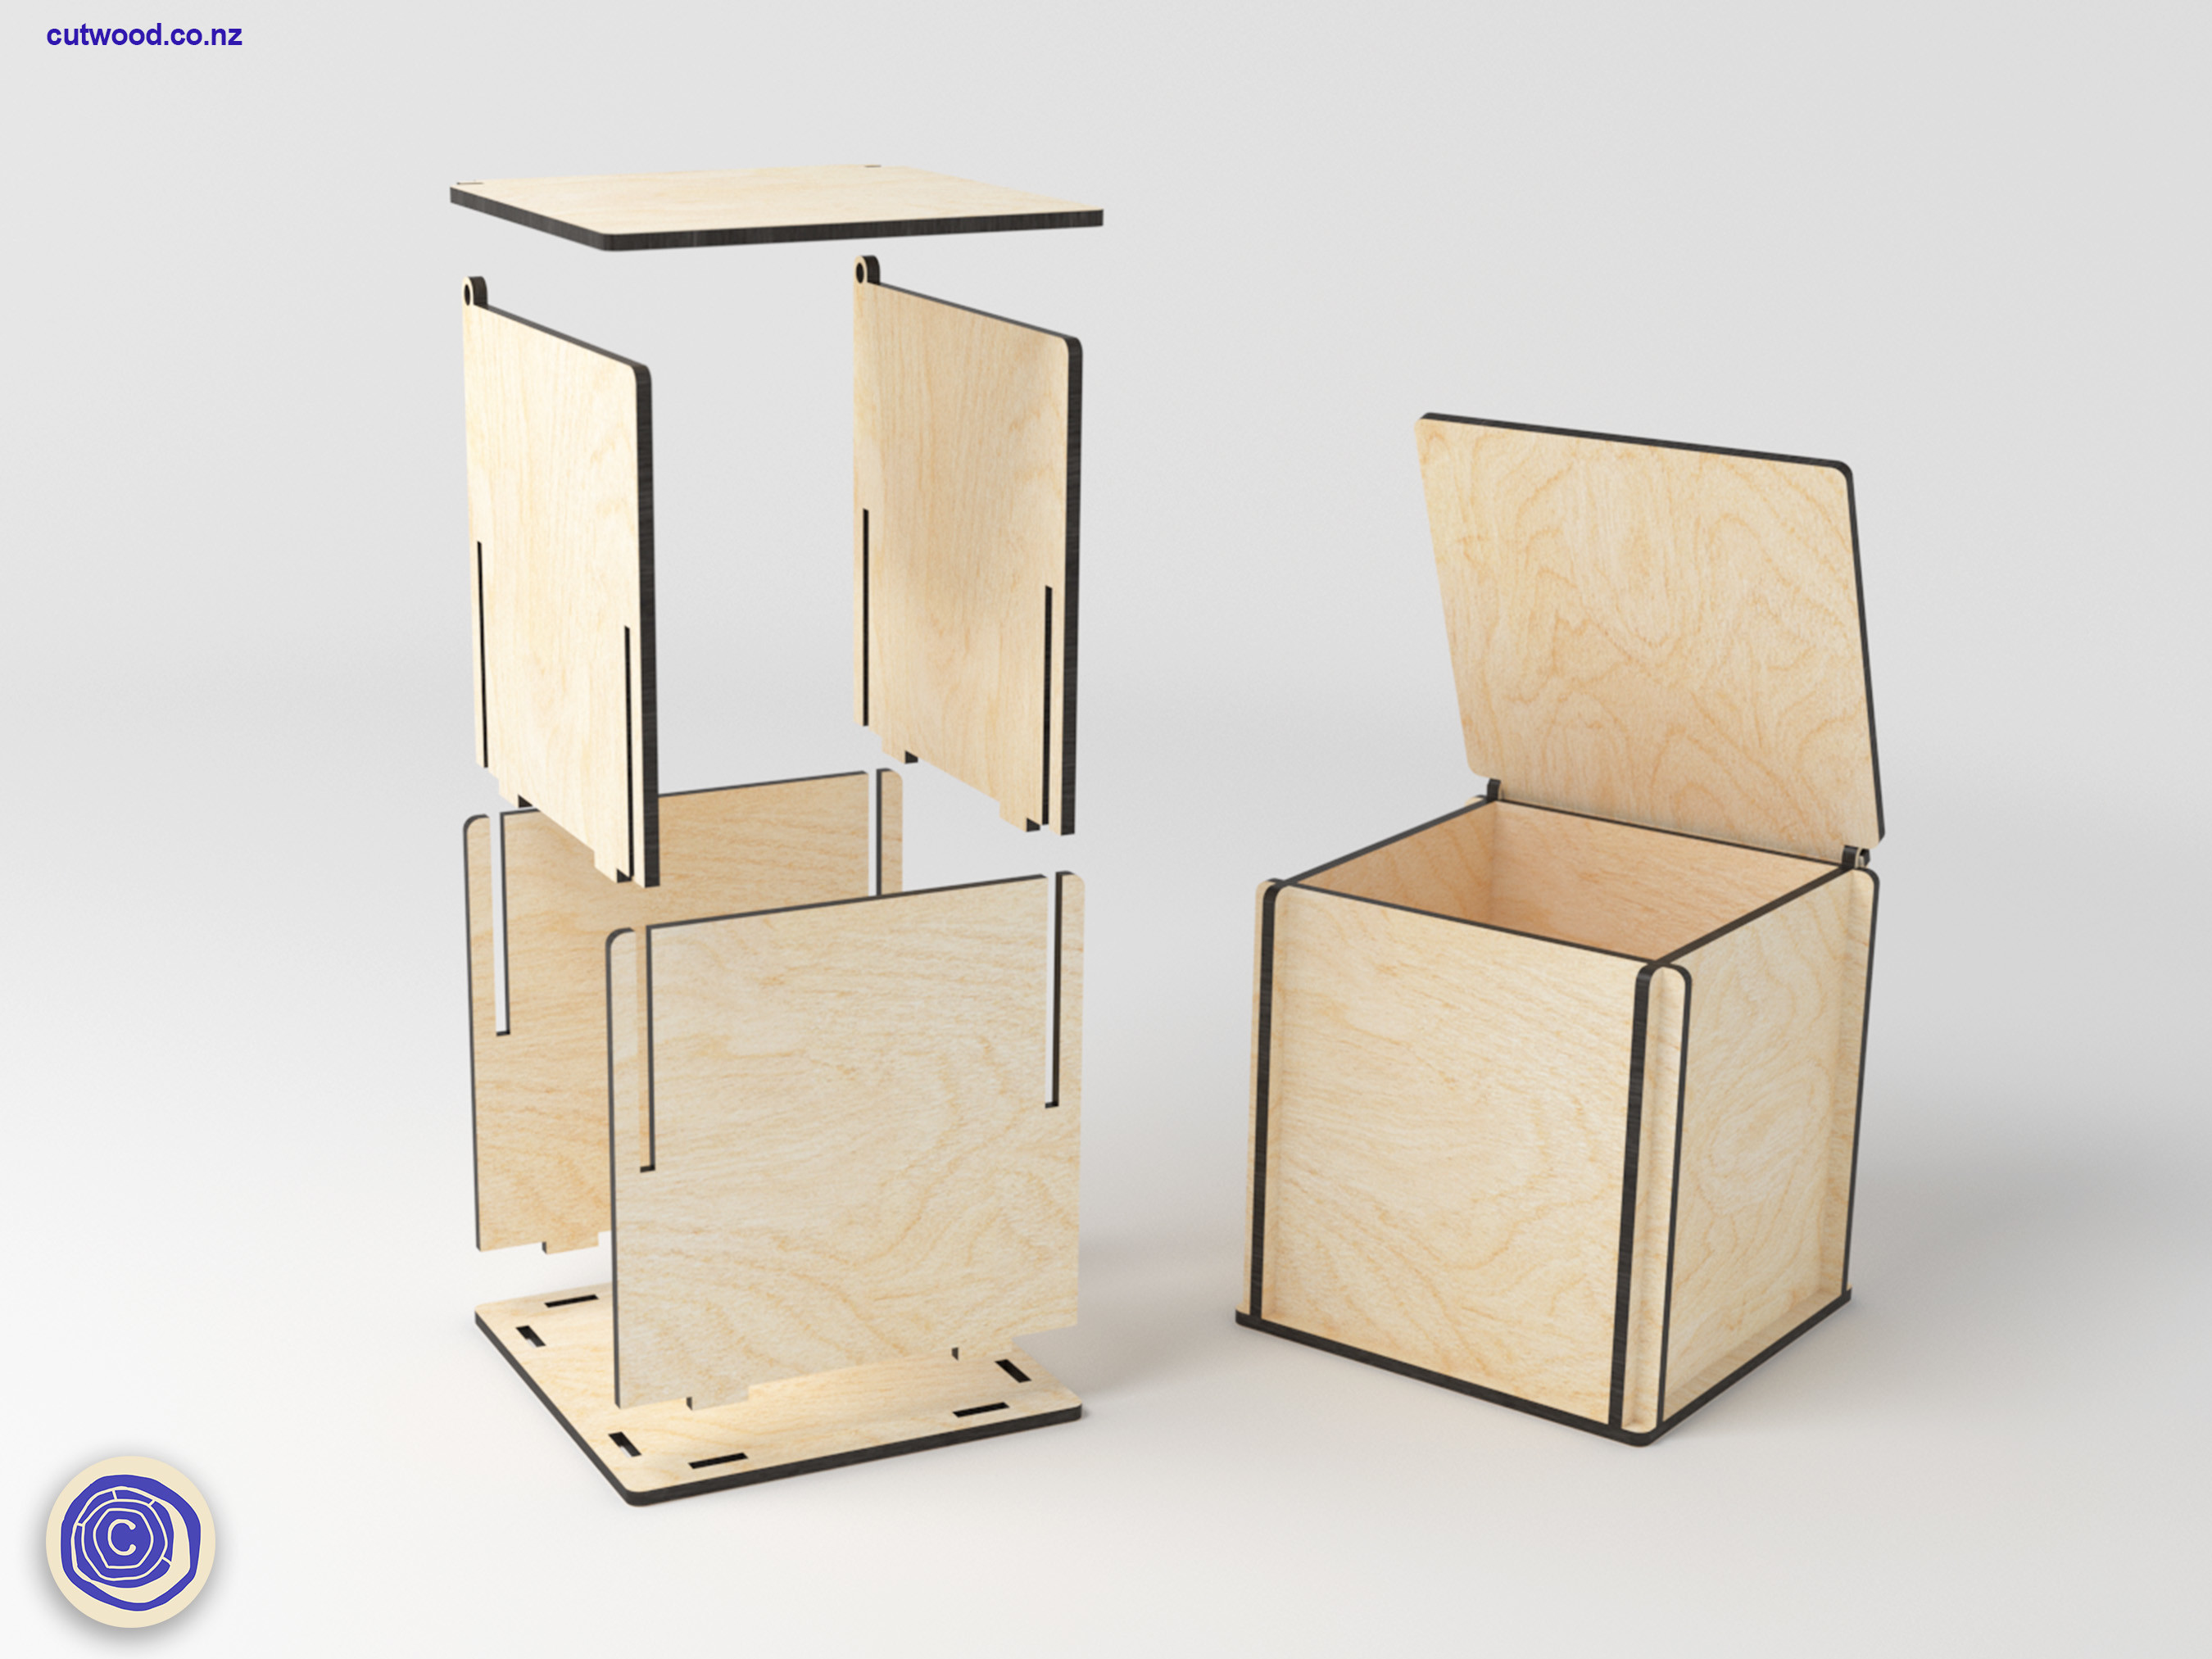 Laser Cut Slot Together Box File Graphic by · Creative Fabrica